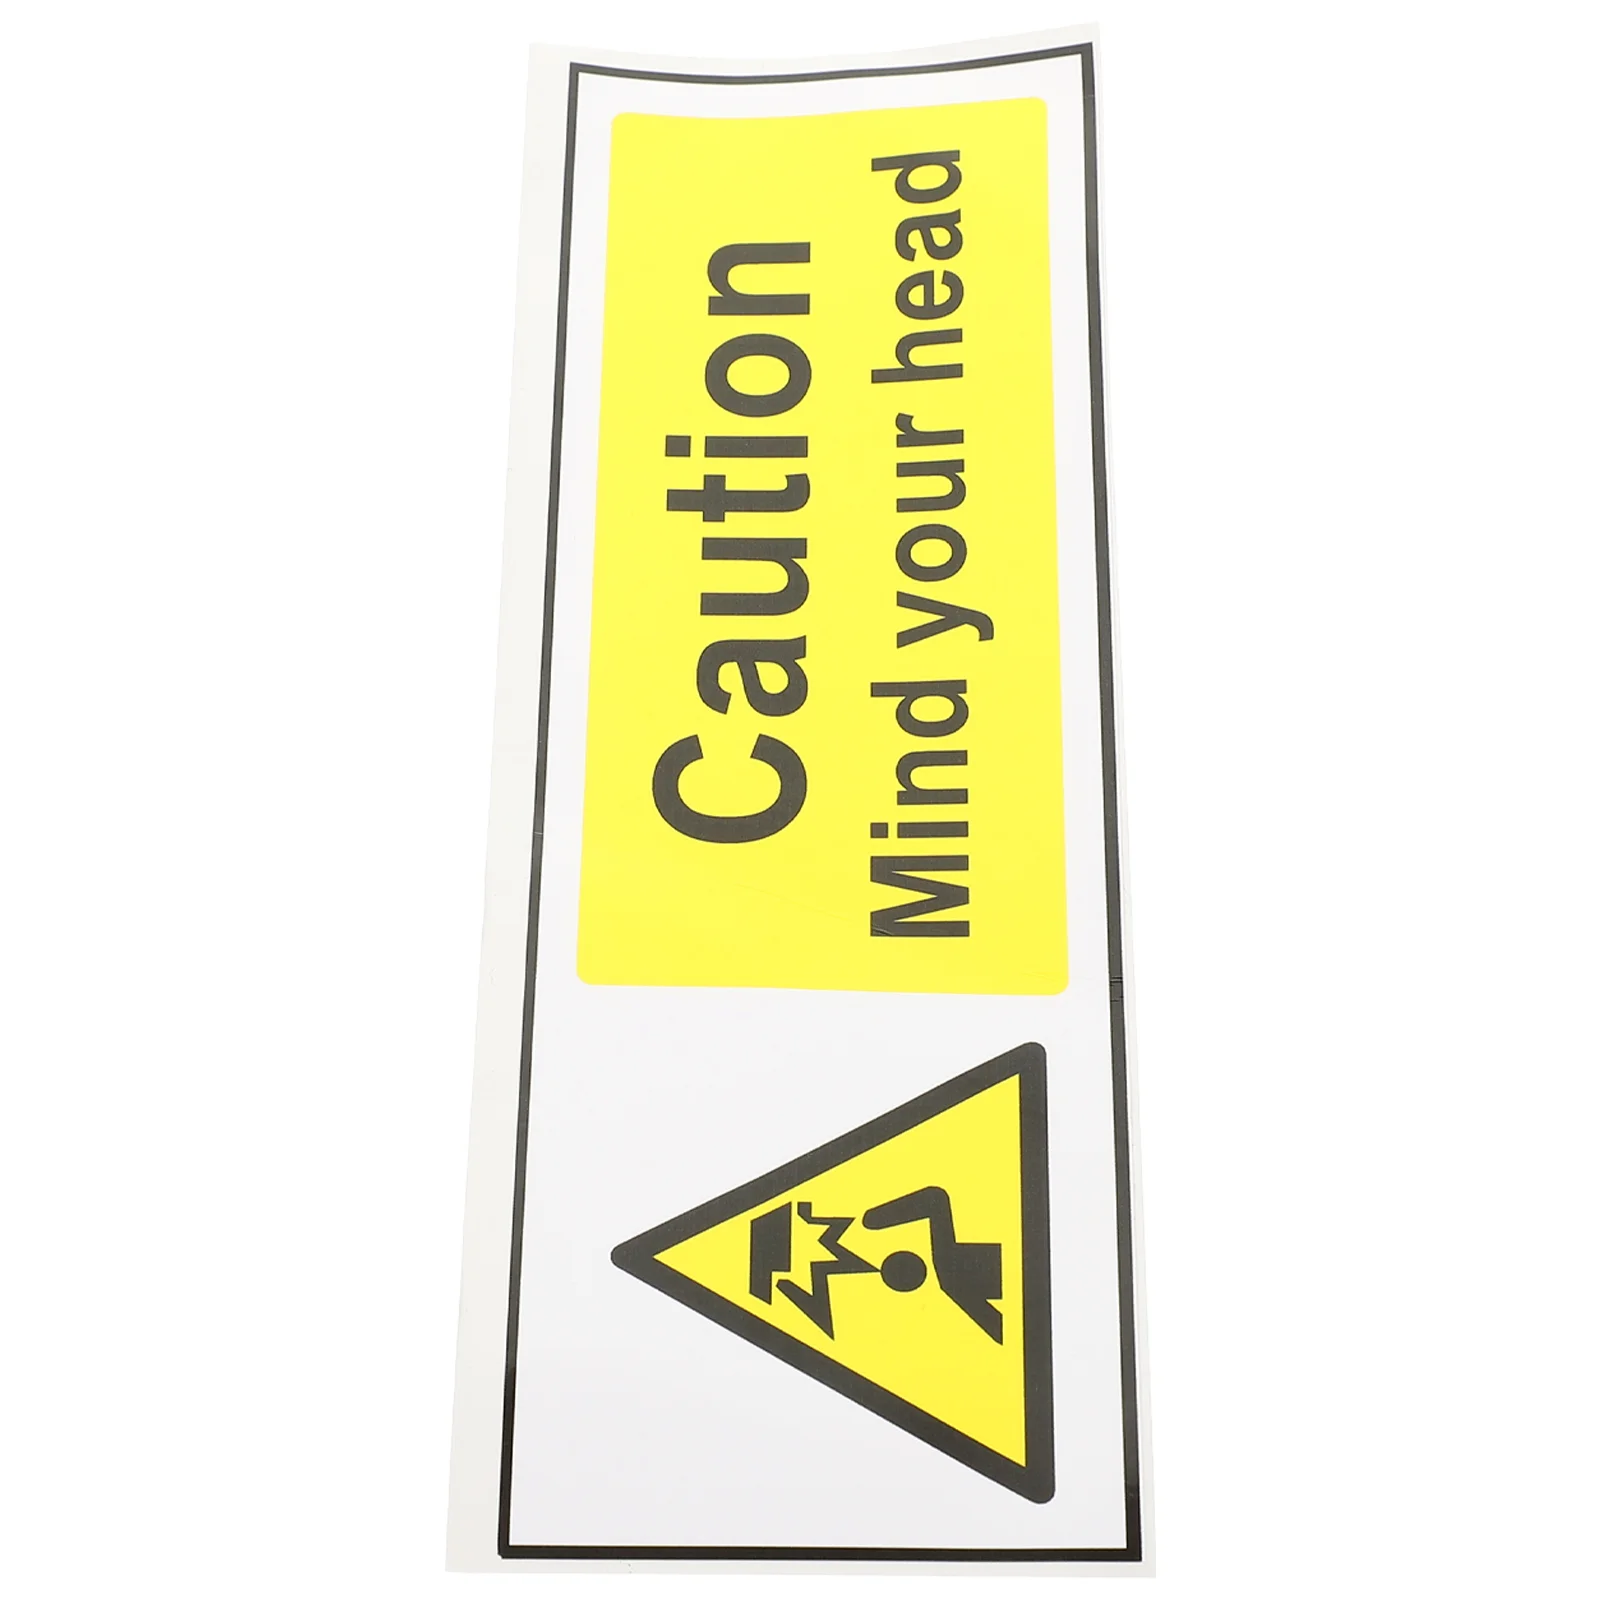 

Be Careful Head Stickers Caution Low Ceiling Signs Watch Your Warning Decal Mind Overhead Clearance Wall Decor Waterproof